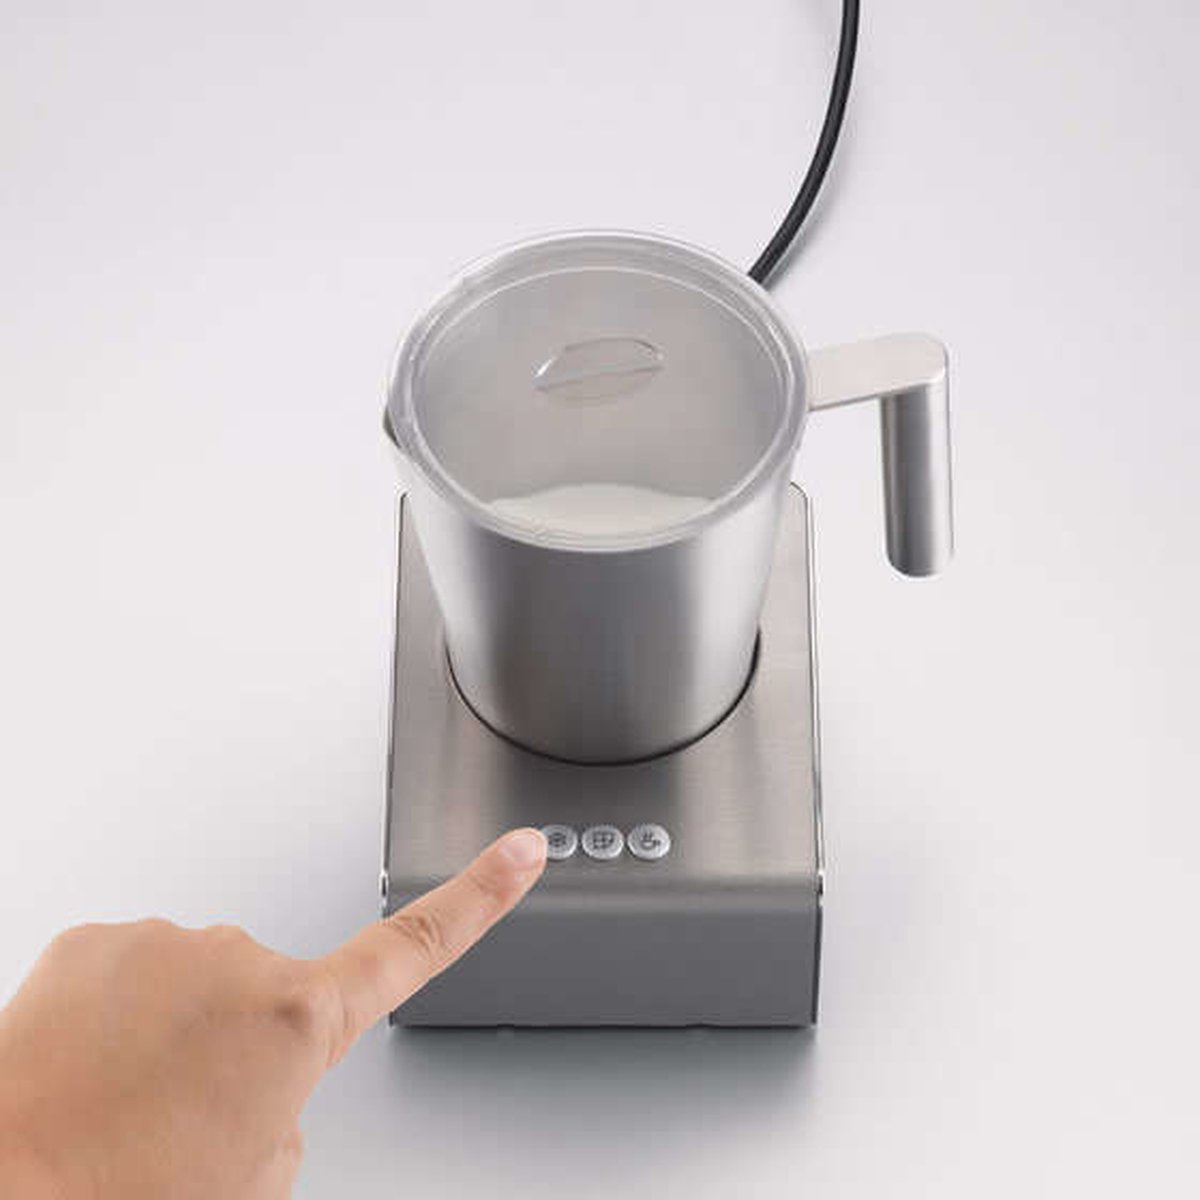 Illy Milk Frother | bol.com